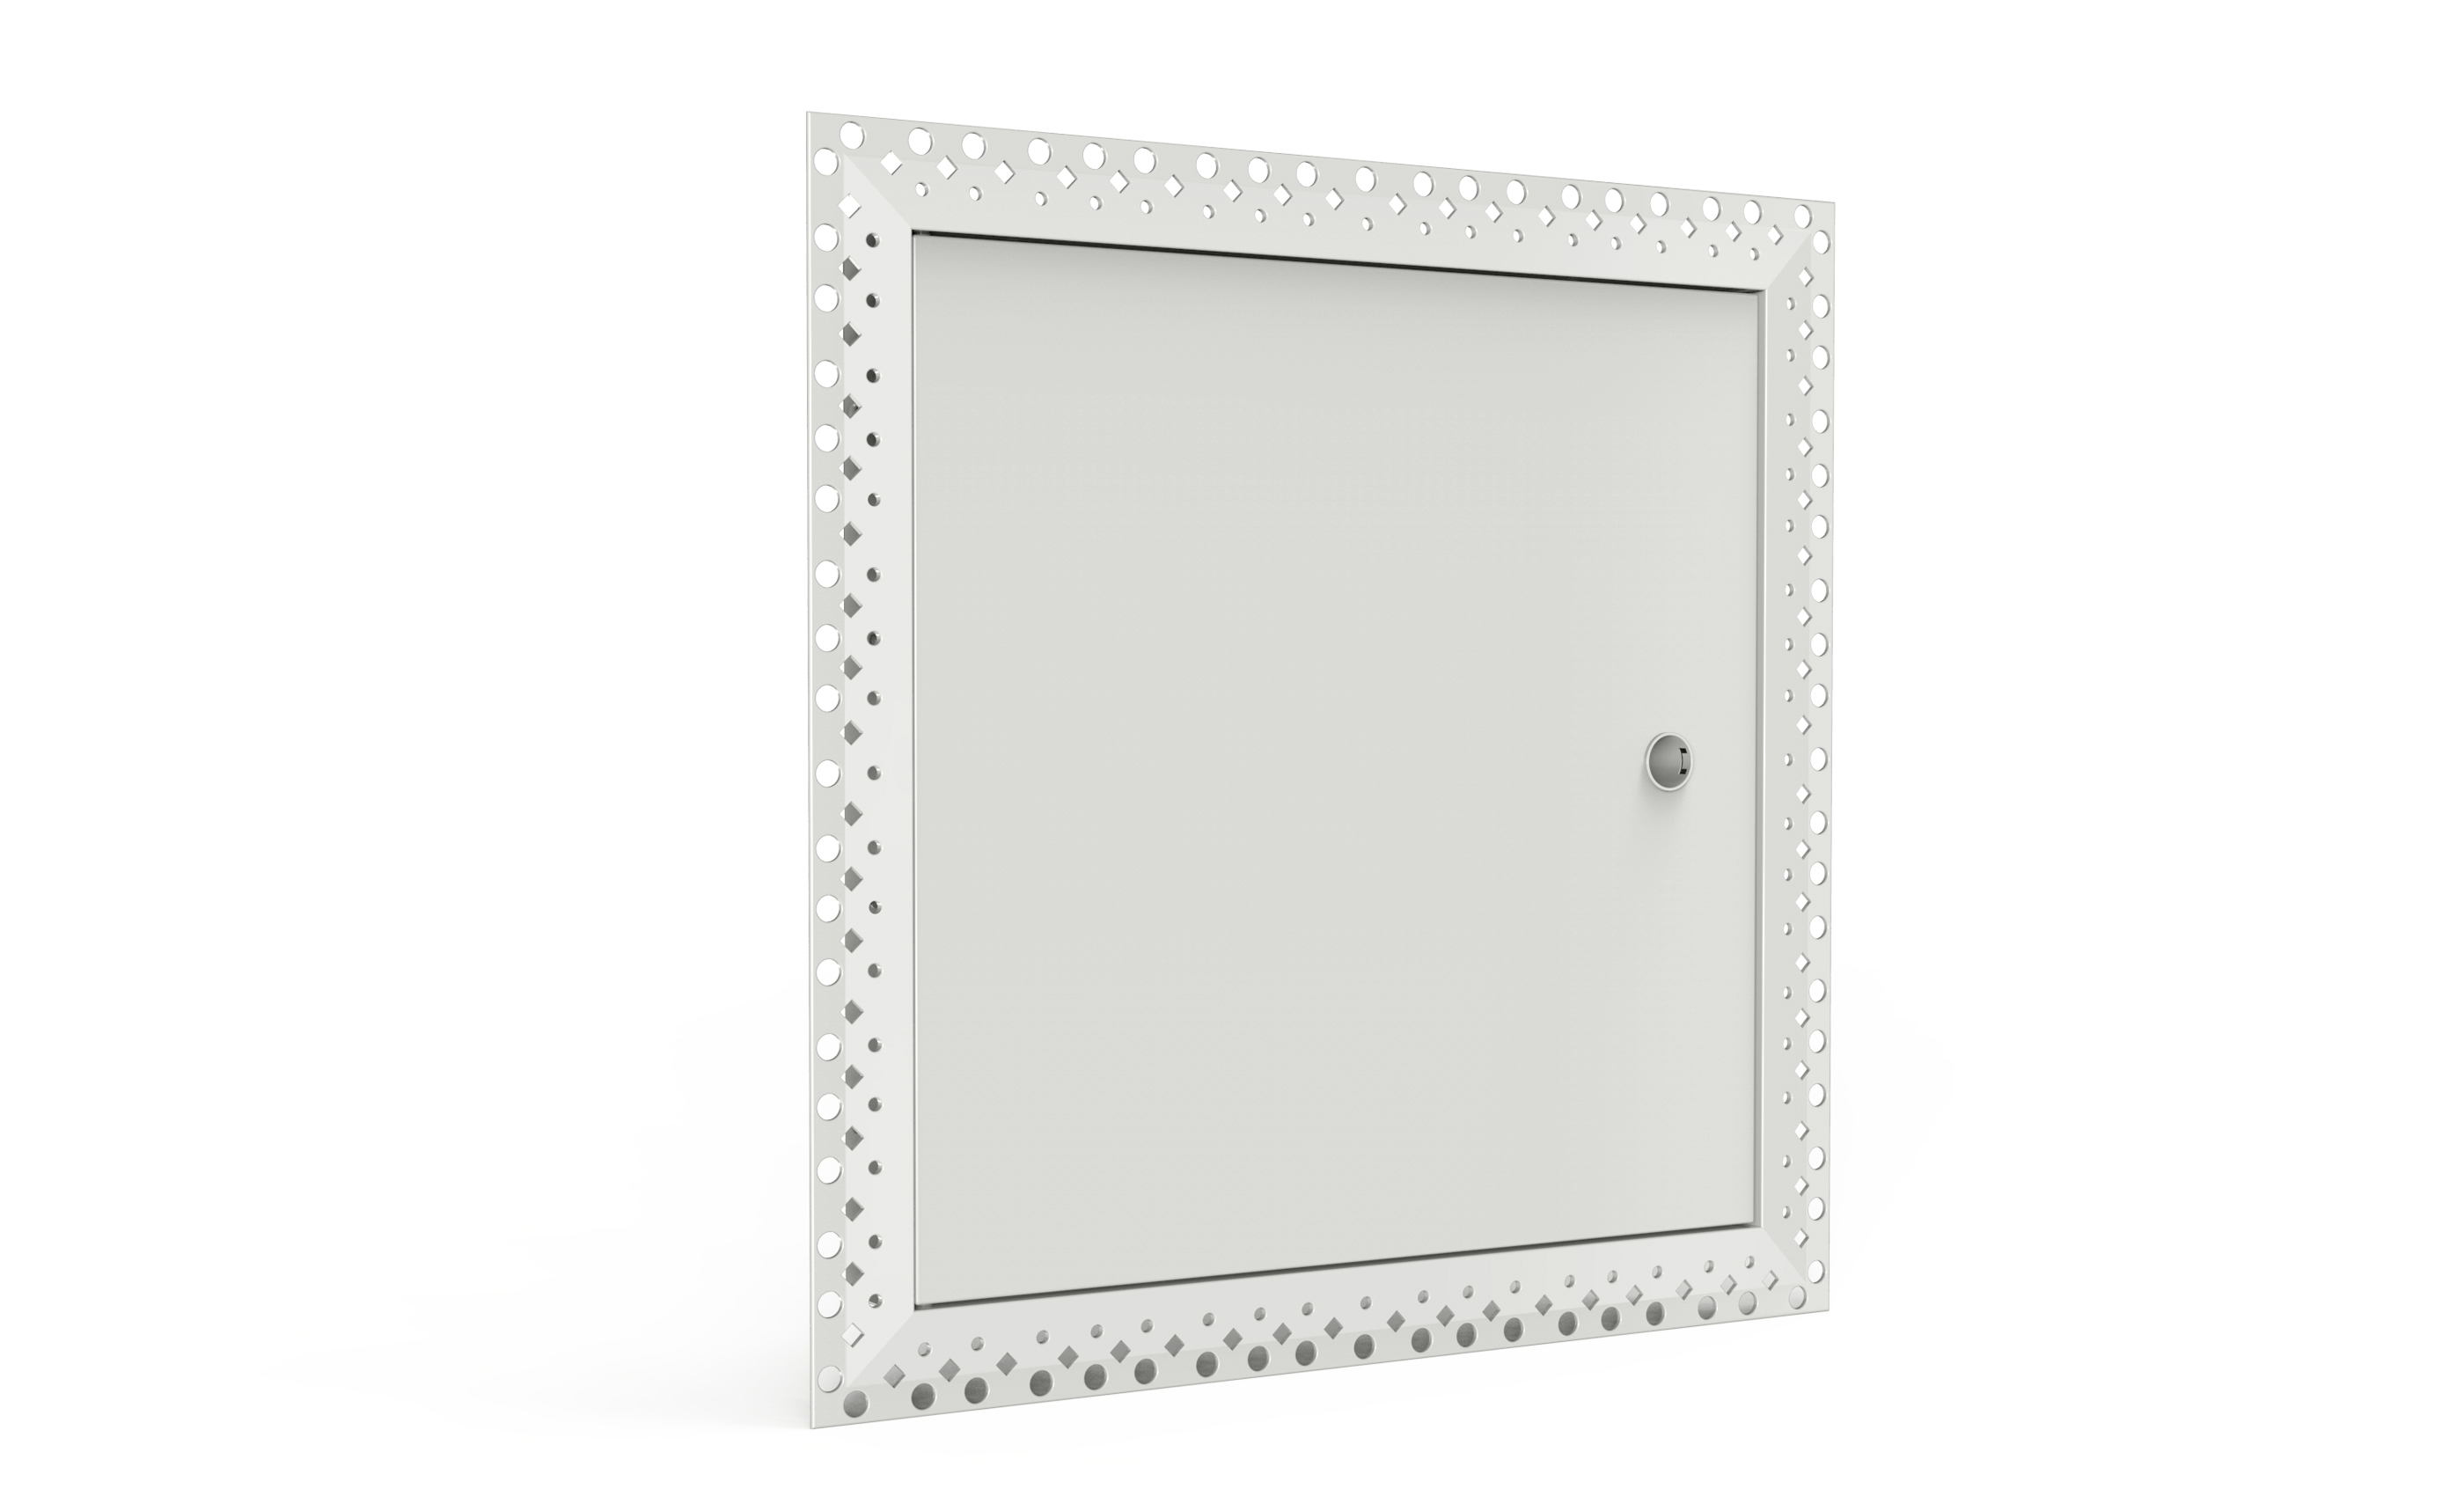  Steel Access Panels(Non Fire Rated)